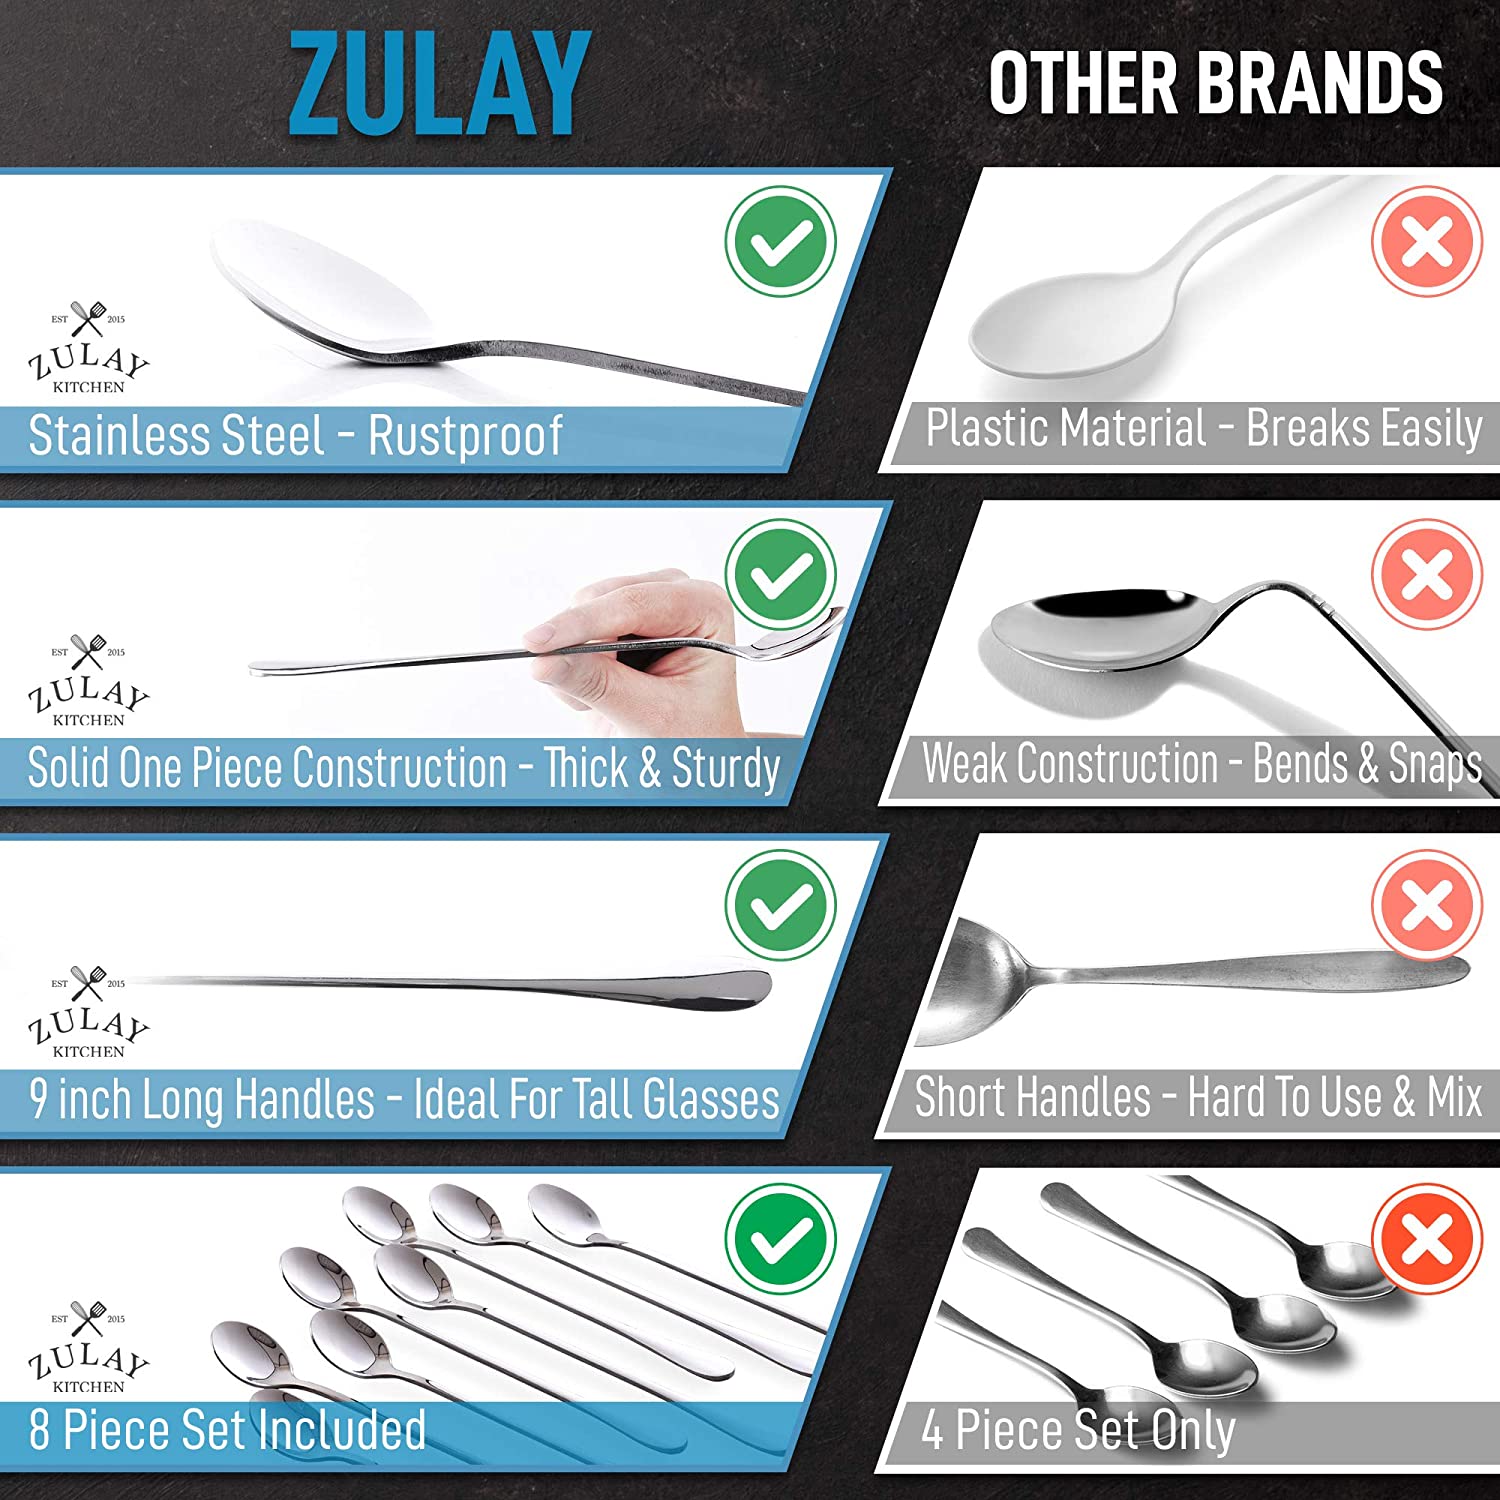 Long Handled Spoons (8 pieces) - 9 inch - Zulay KitchenZulay Kitchen